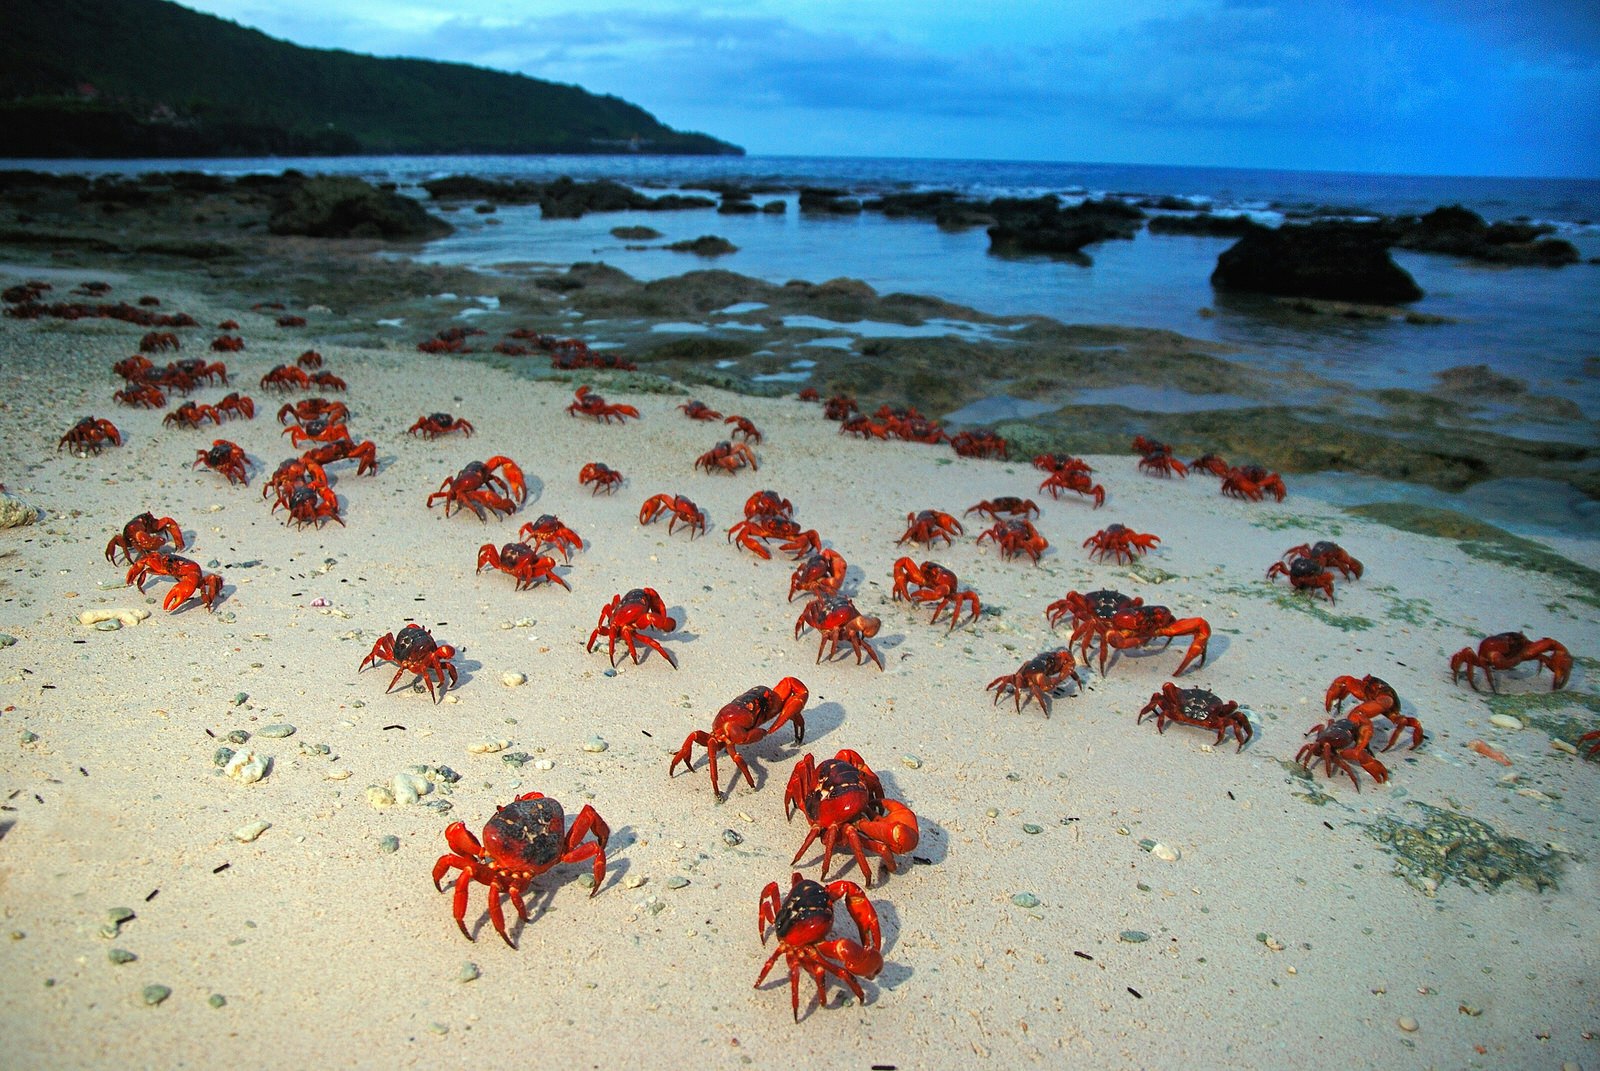 A shot of thousands of red crabs coming in from the sea onto the white sand beach of Christmas Island at nightfall